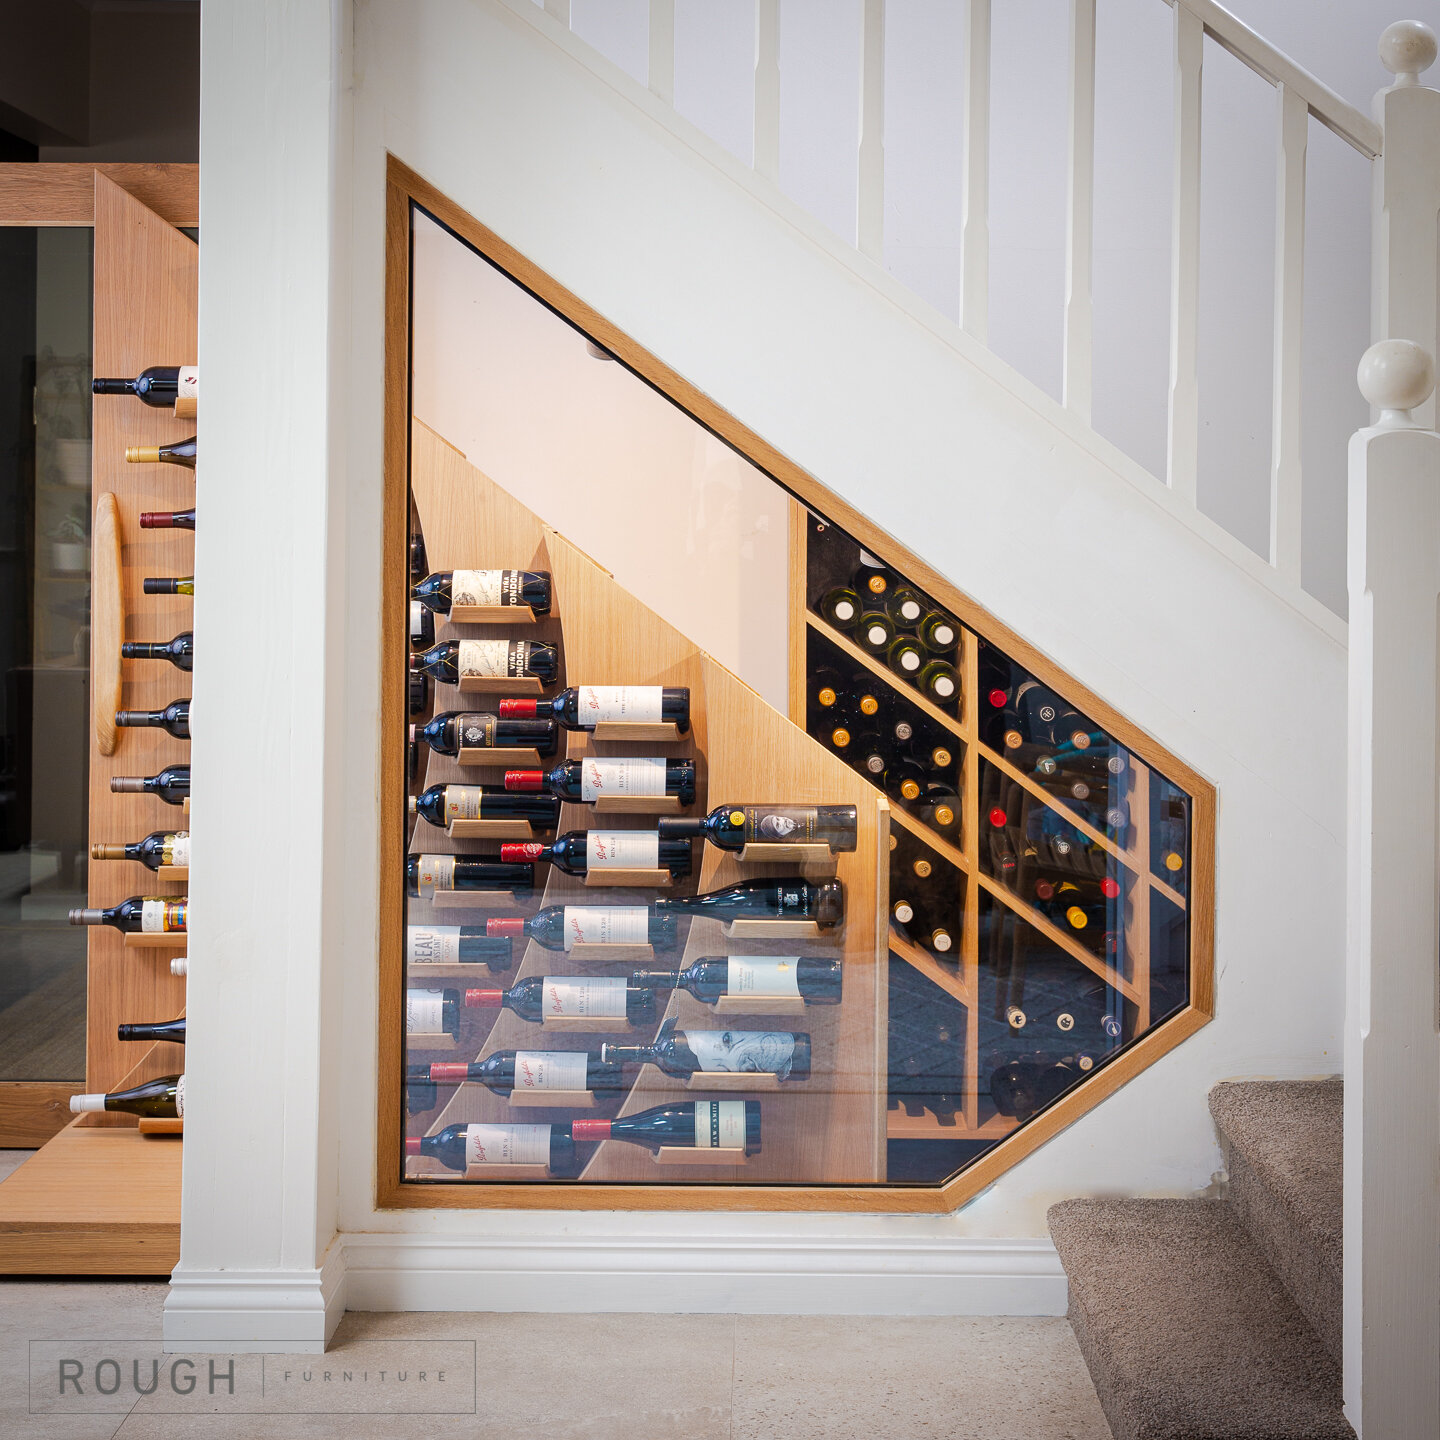 Wave Wine Rack Slide-Out Wine Cellar That's Under The Stairs